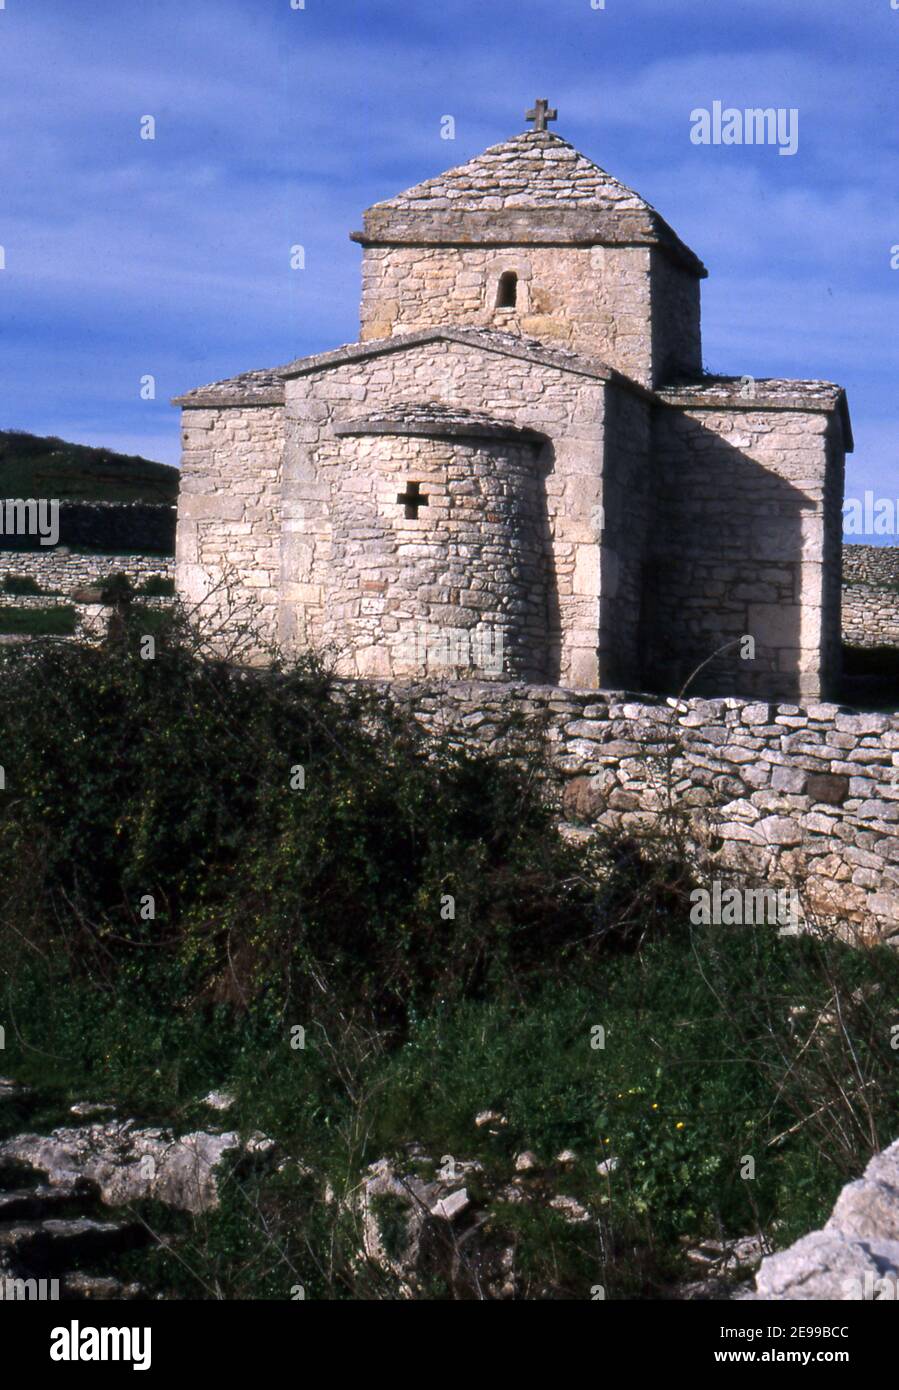 Cossoine, Sardinia, Italy. Santa Maria Iscalas country church (scanned from colorslide) Stock Photo